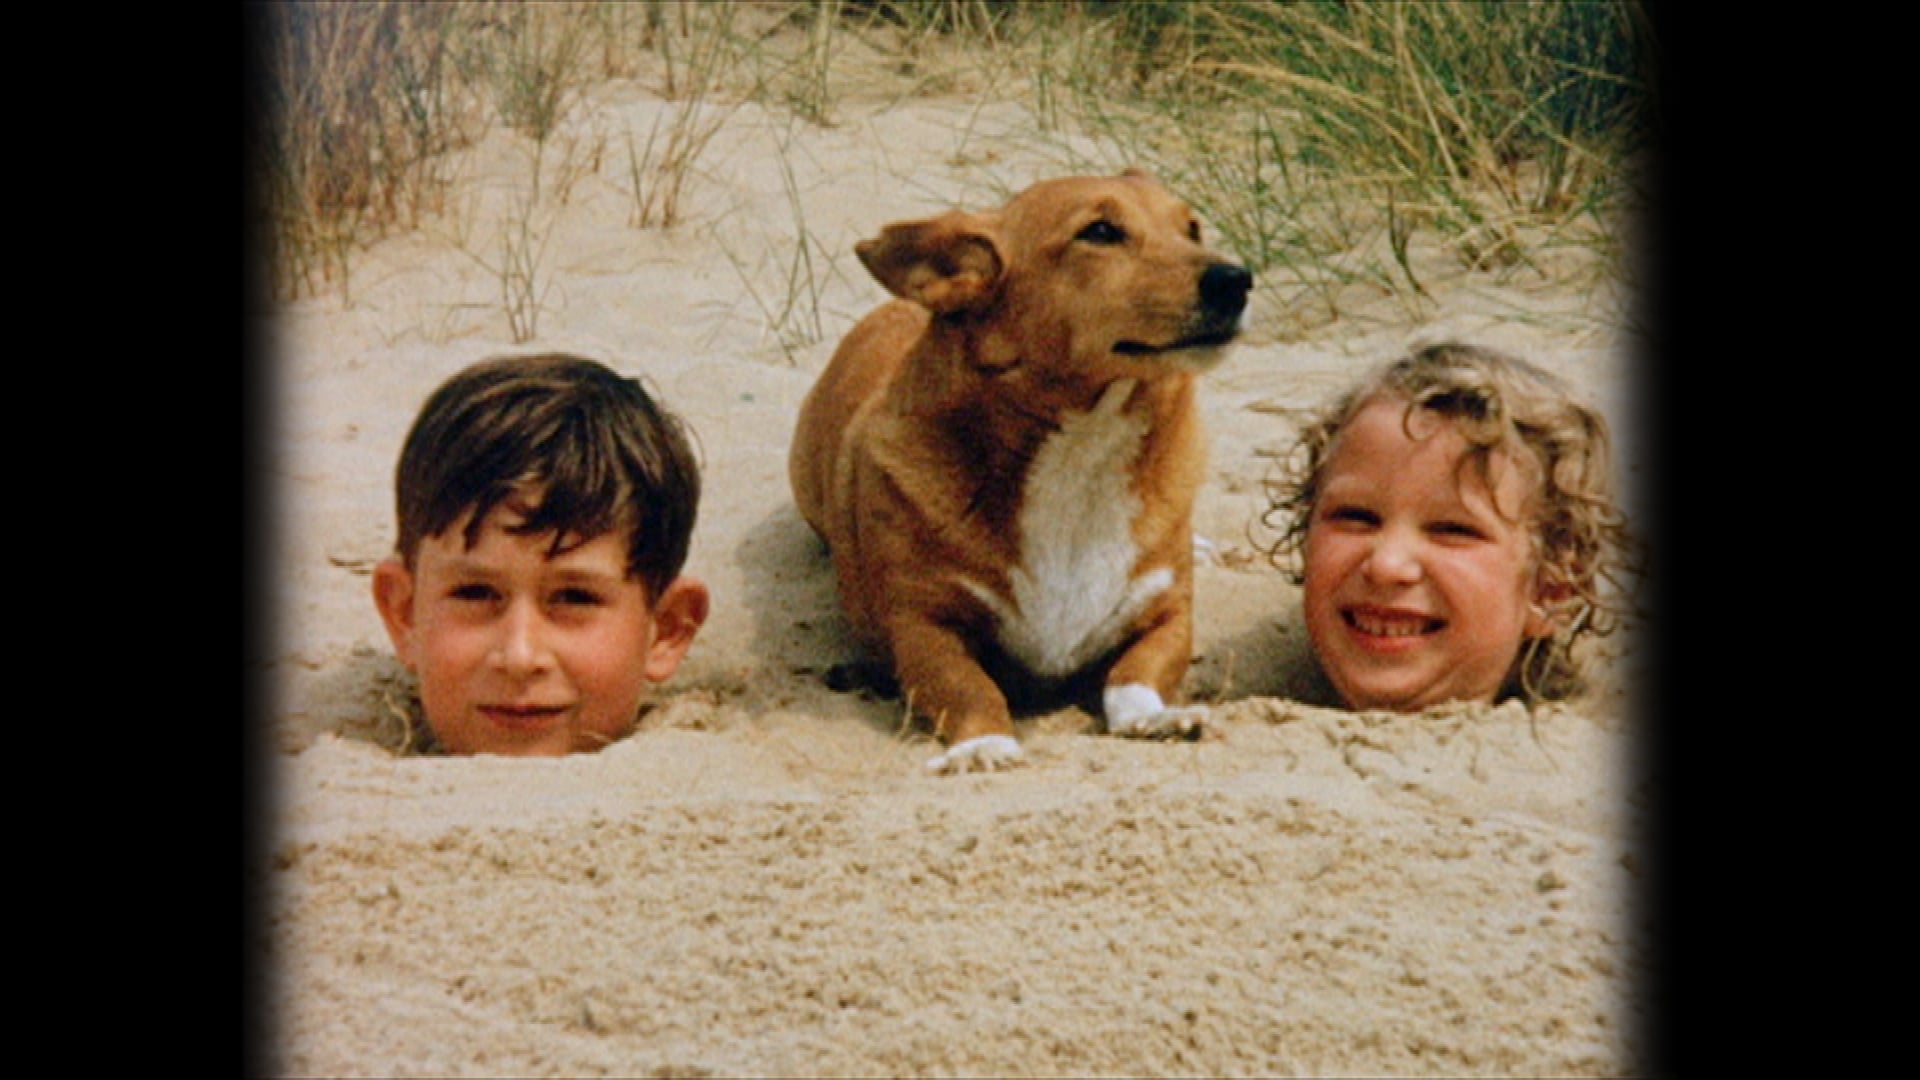 young-Prince-Charles-Princess-Anne-got-silly-sand.jpg